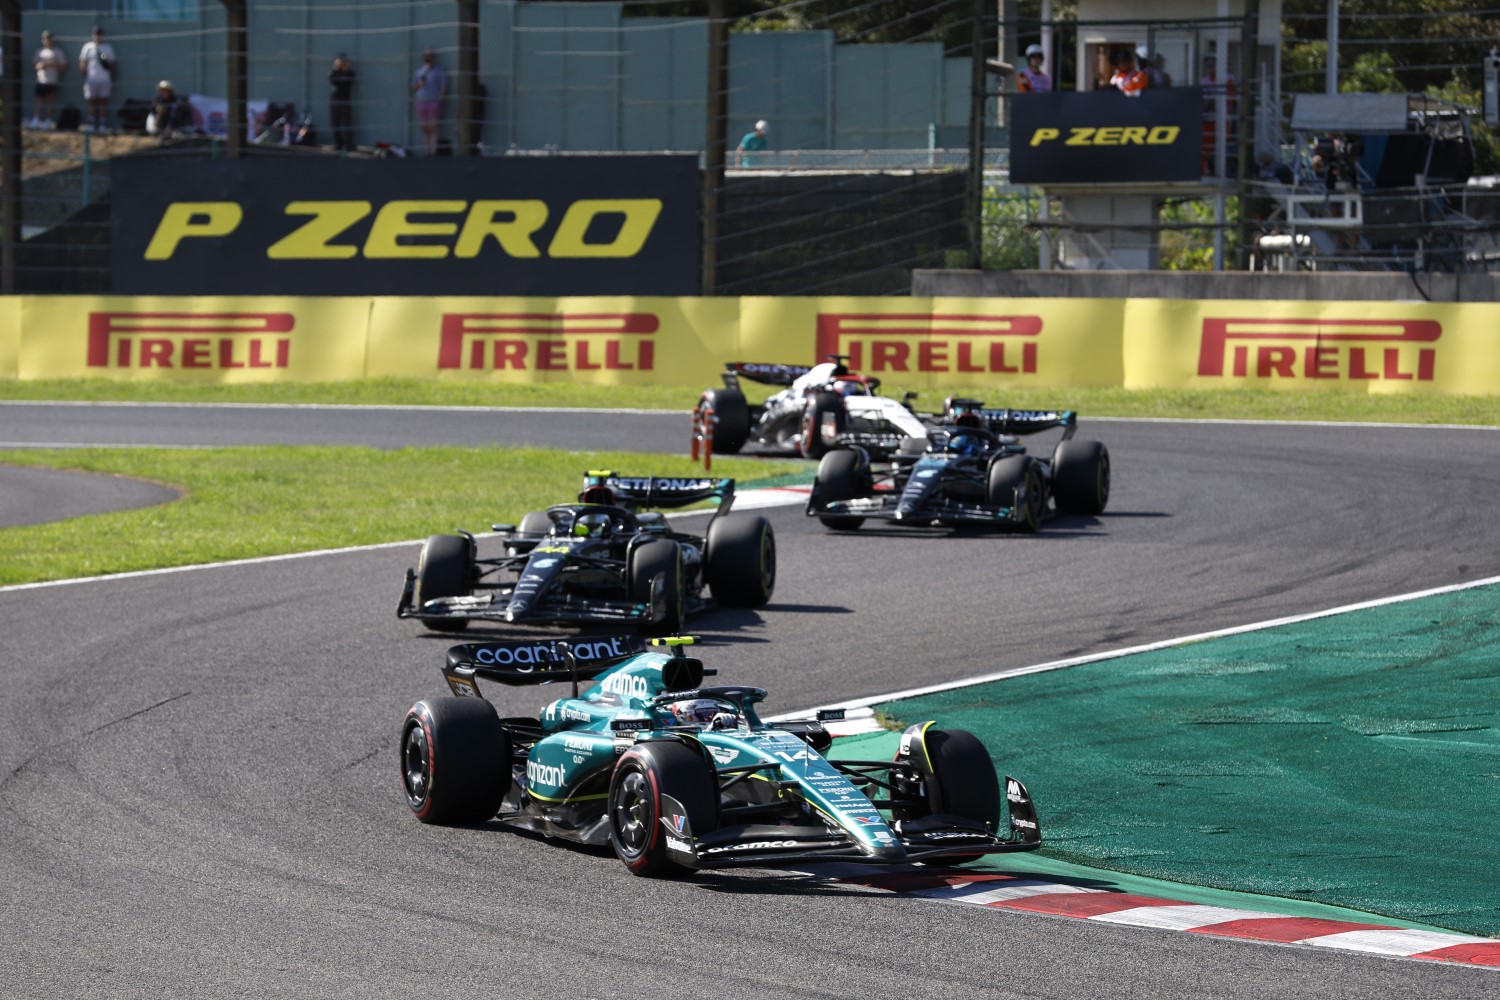 Fernando Alonso, Aston Martin AMR23, leads Sir Lewis Hamilton, Mercedes F1 W14, and George Russell, Mercedes F1 W14 during the Japanese GP at Suzuka on Sunday September 24, 2023 in Suzuka, Japan. (Photo by Steven Tee / LAT Images)